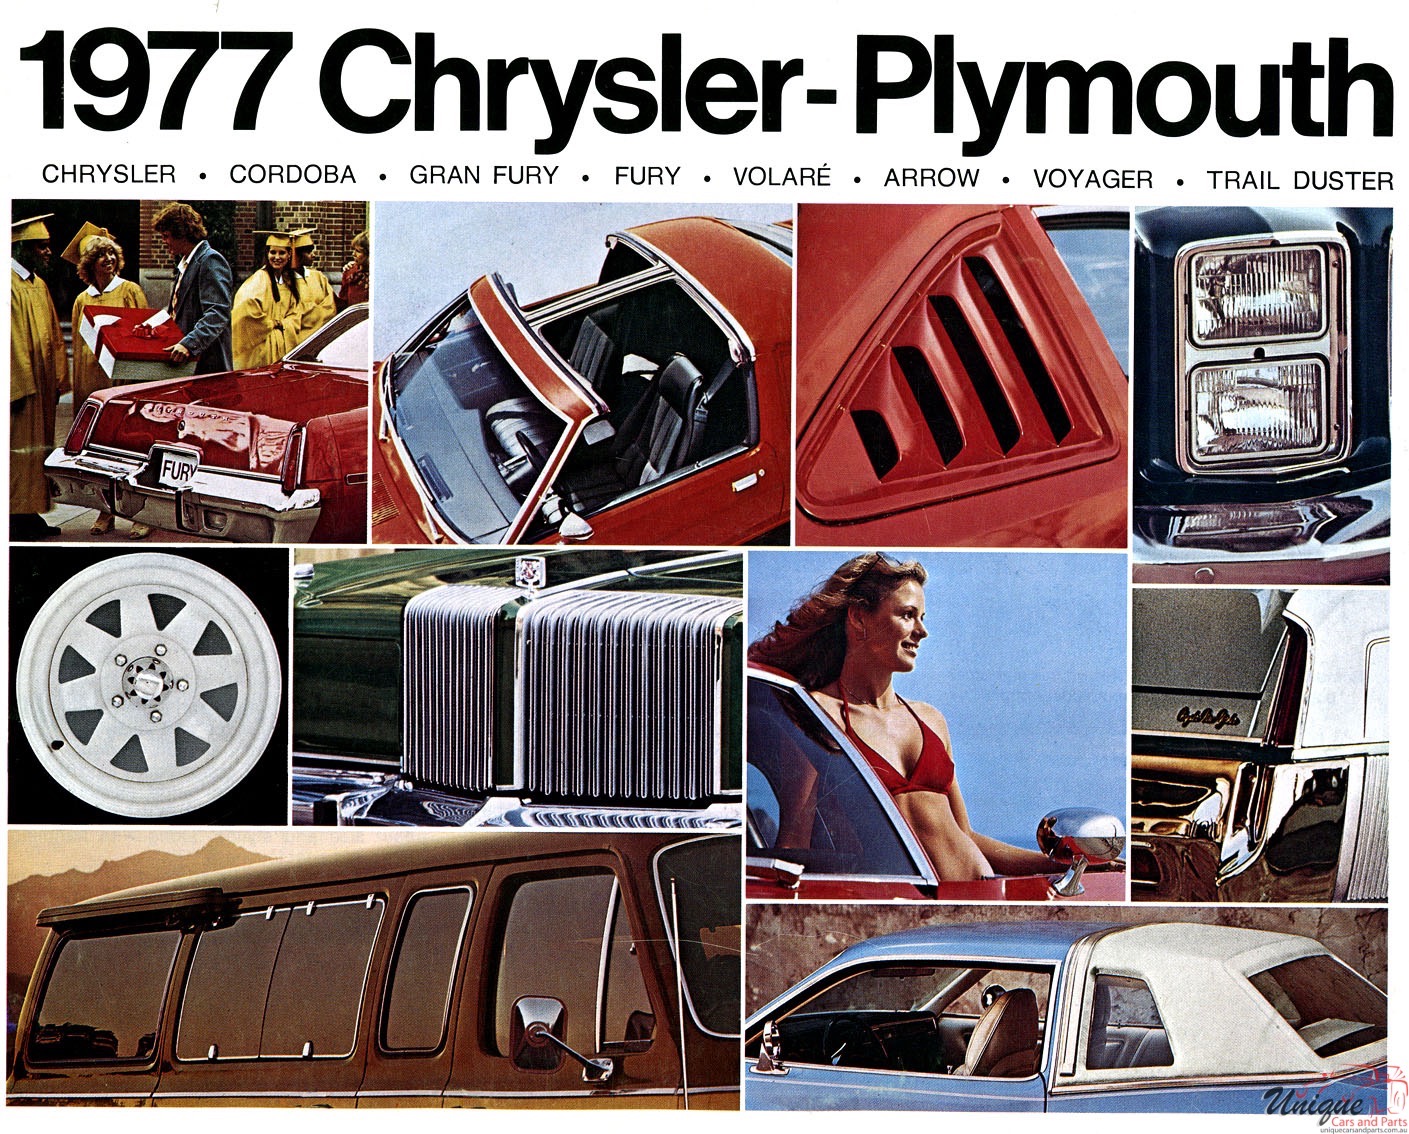 1977 Chrysler-Plymouth Brochure Page 5